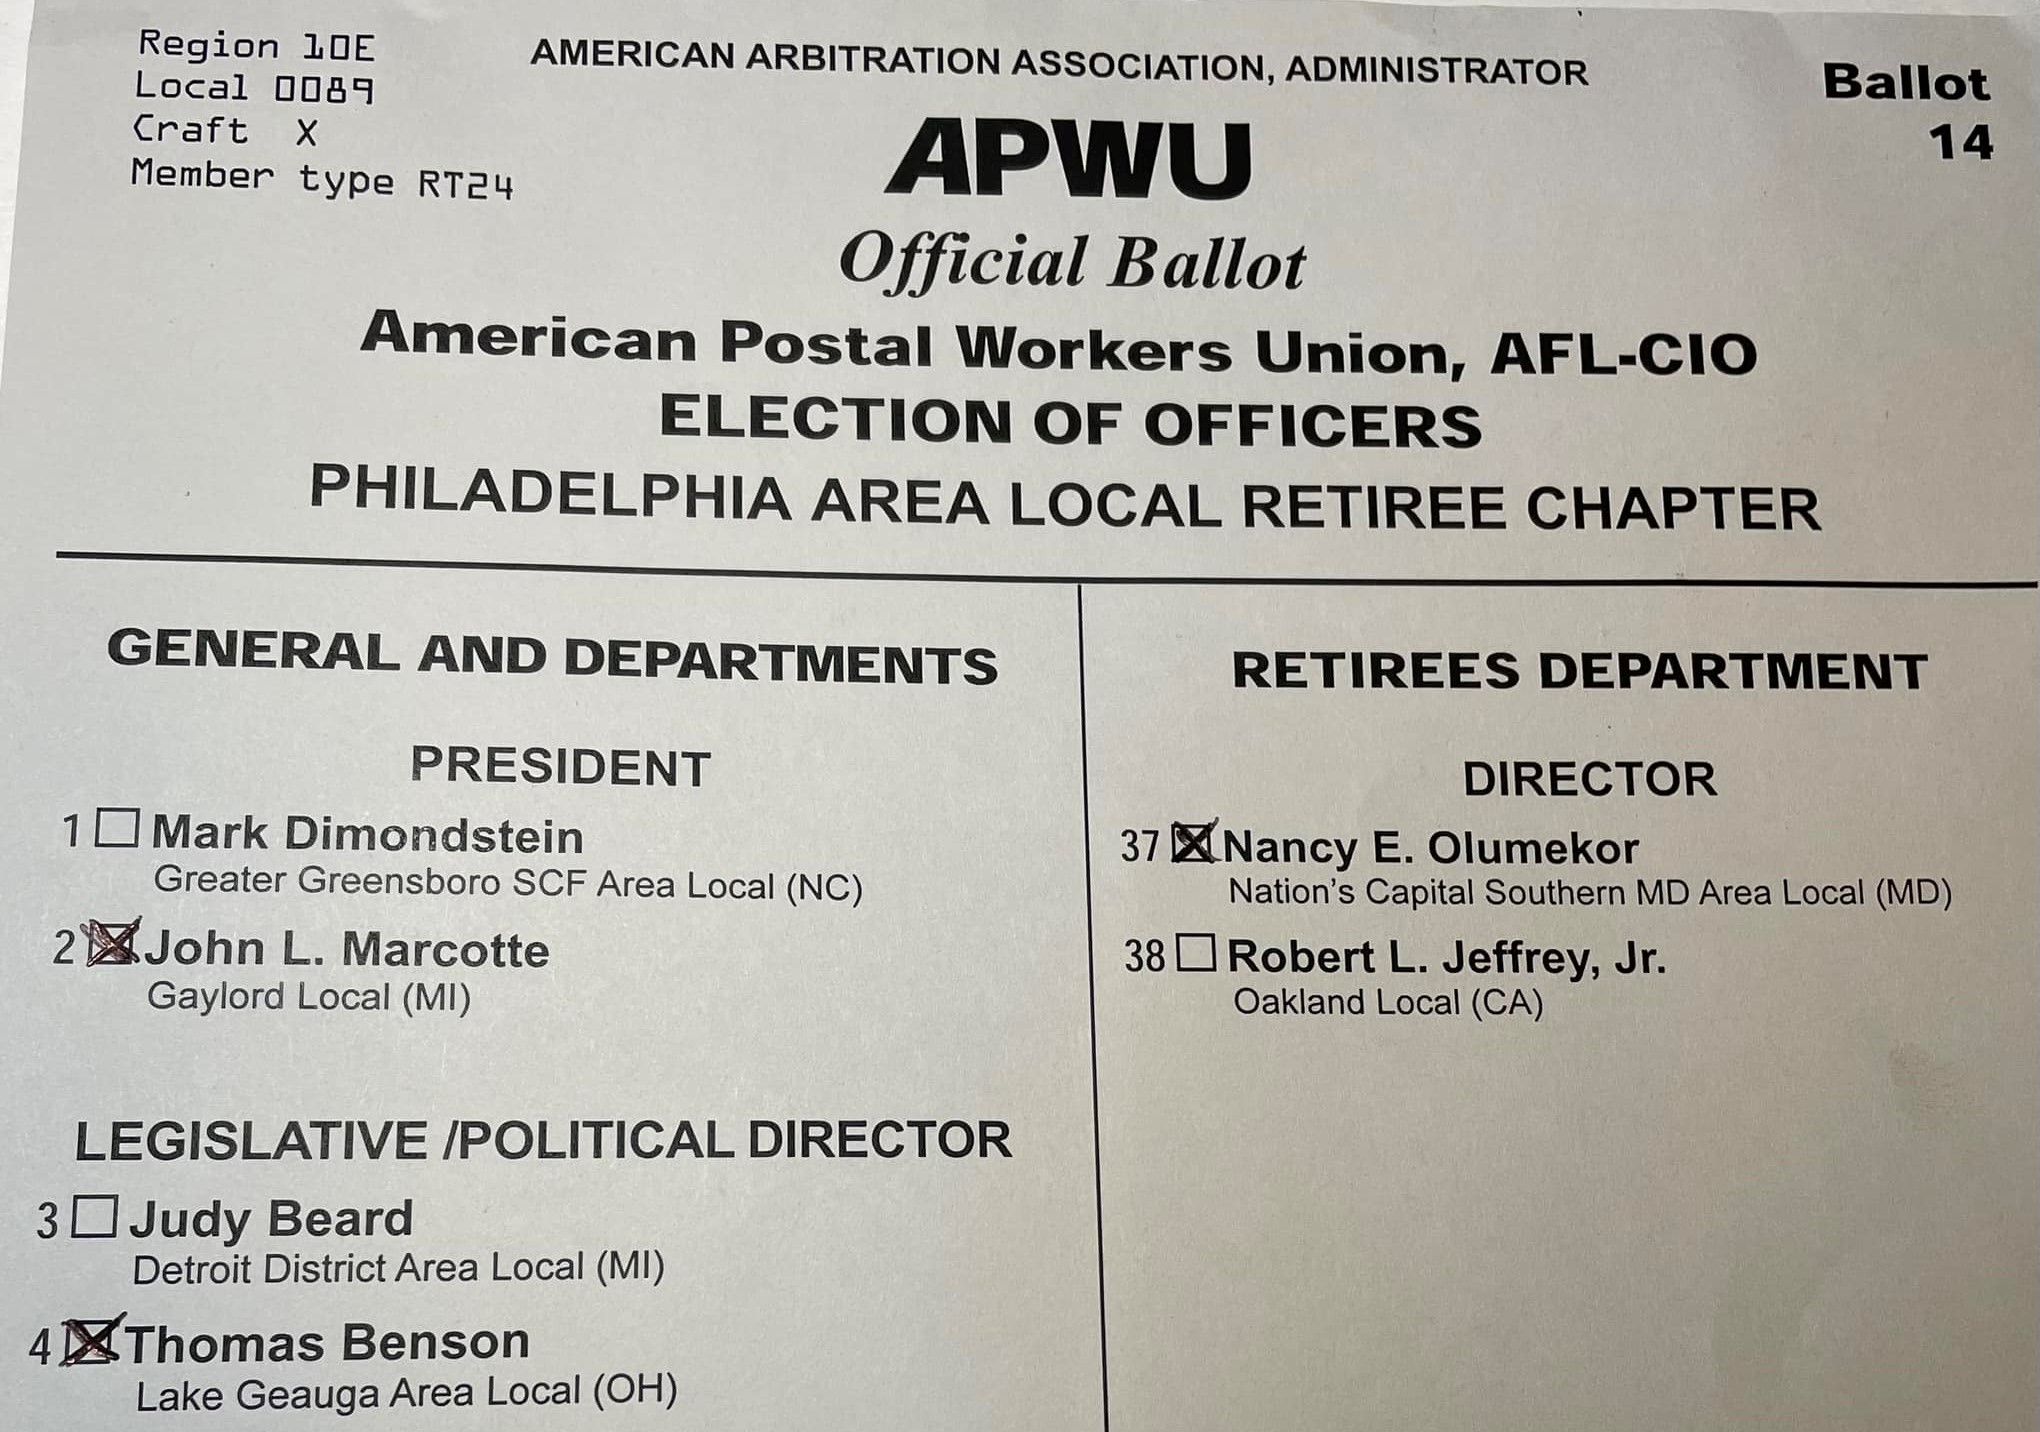 Who did 21CPW Administrator and APWU Retiree Activist/Advocate vote for?